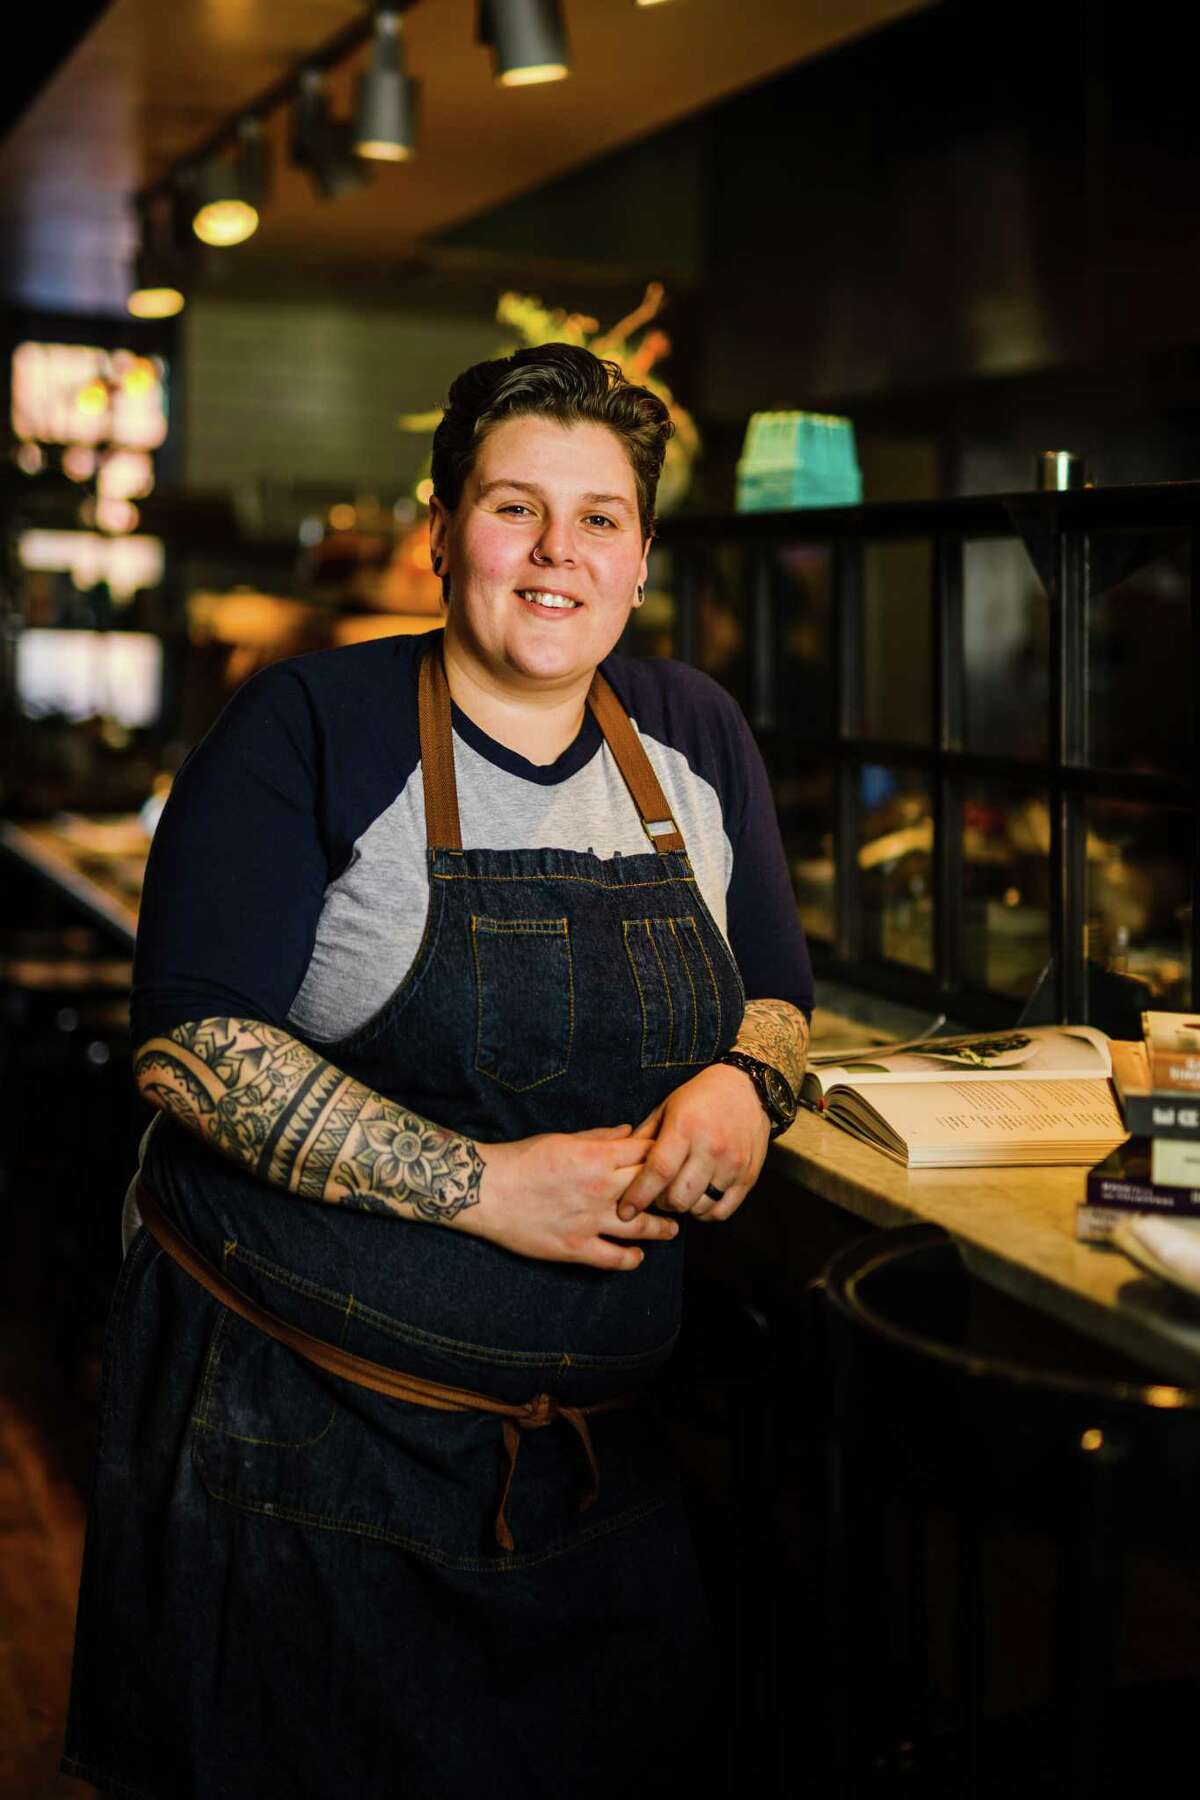 Jes Bengtson, a Danbury native, recently took over the kitchen as executive chef at Amis Trattoria in Westport. Bengtson also oversees the kitchen at Terrain Cafe.